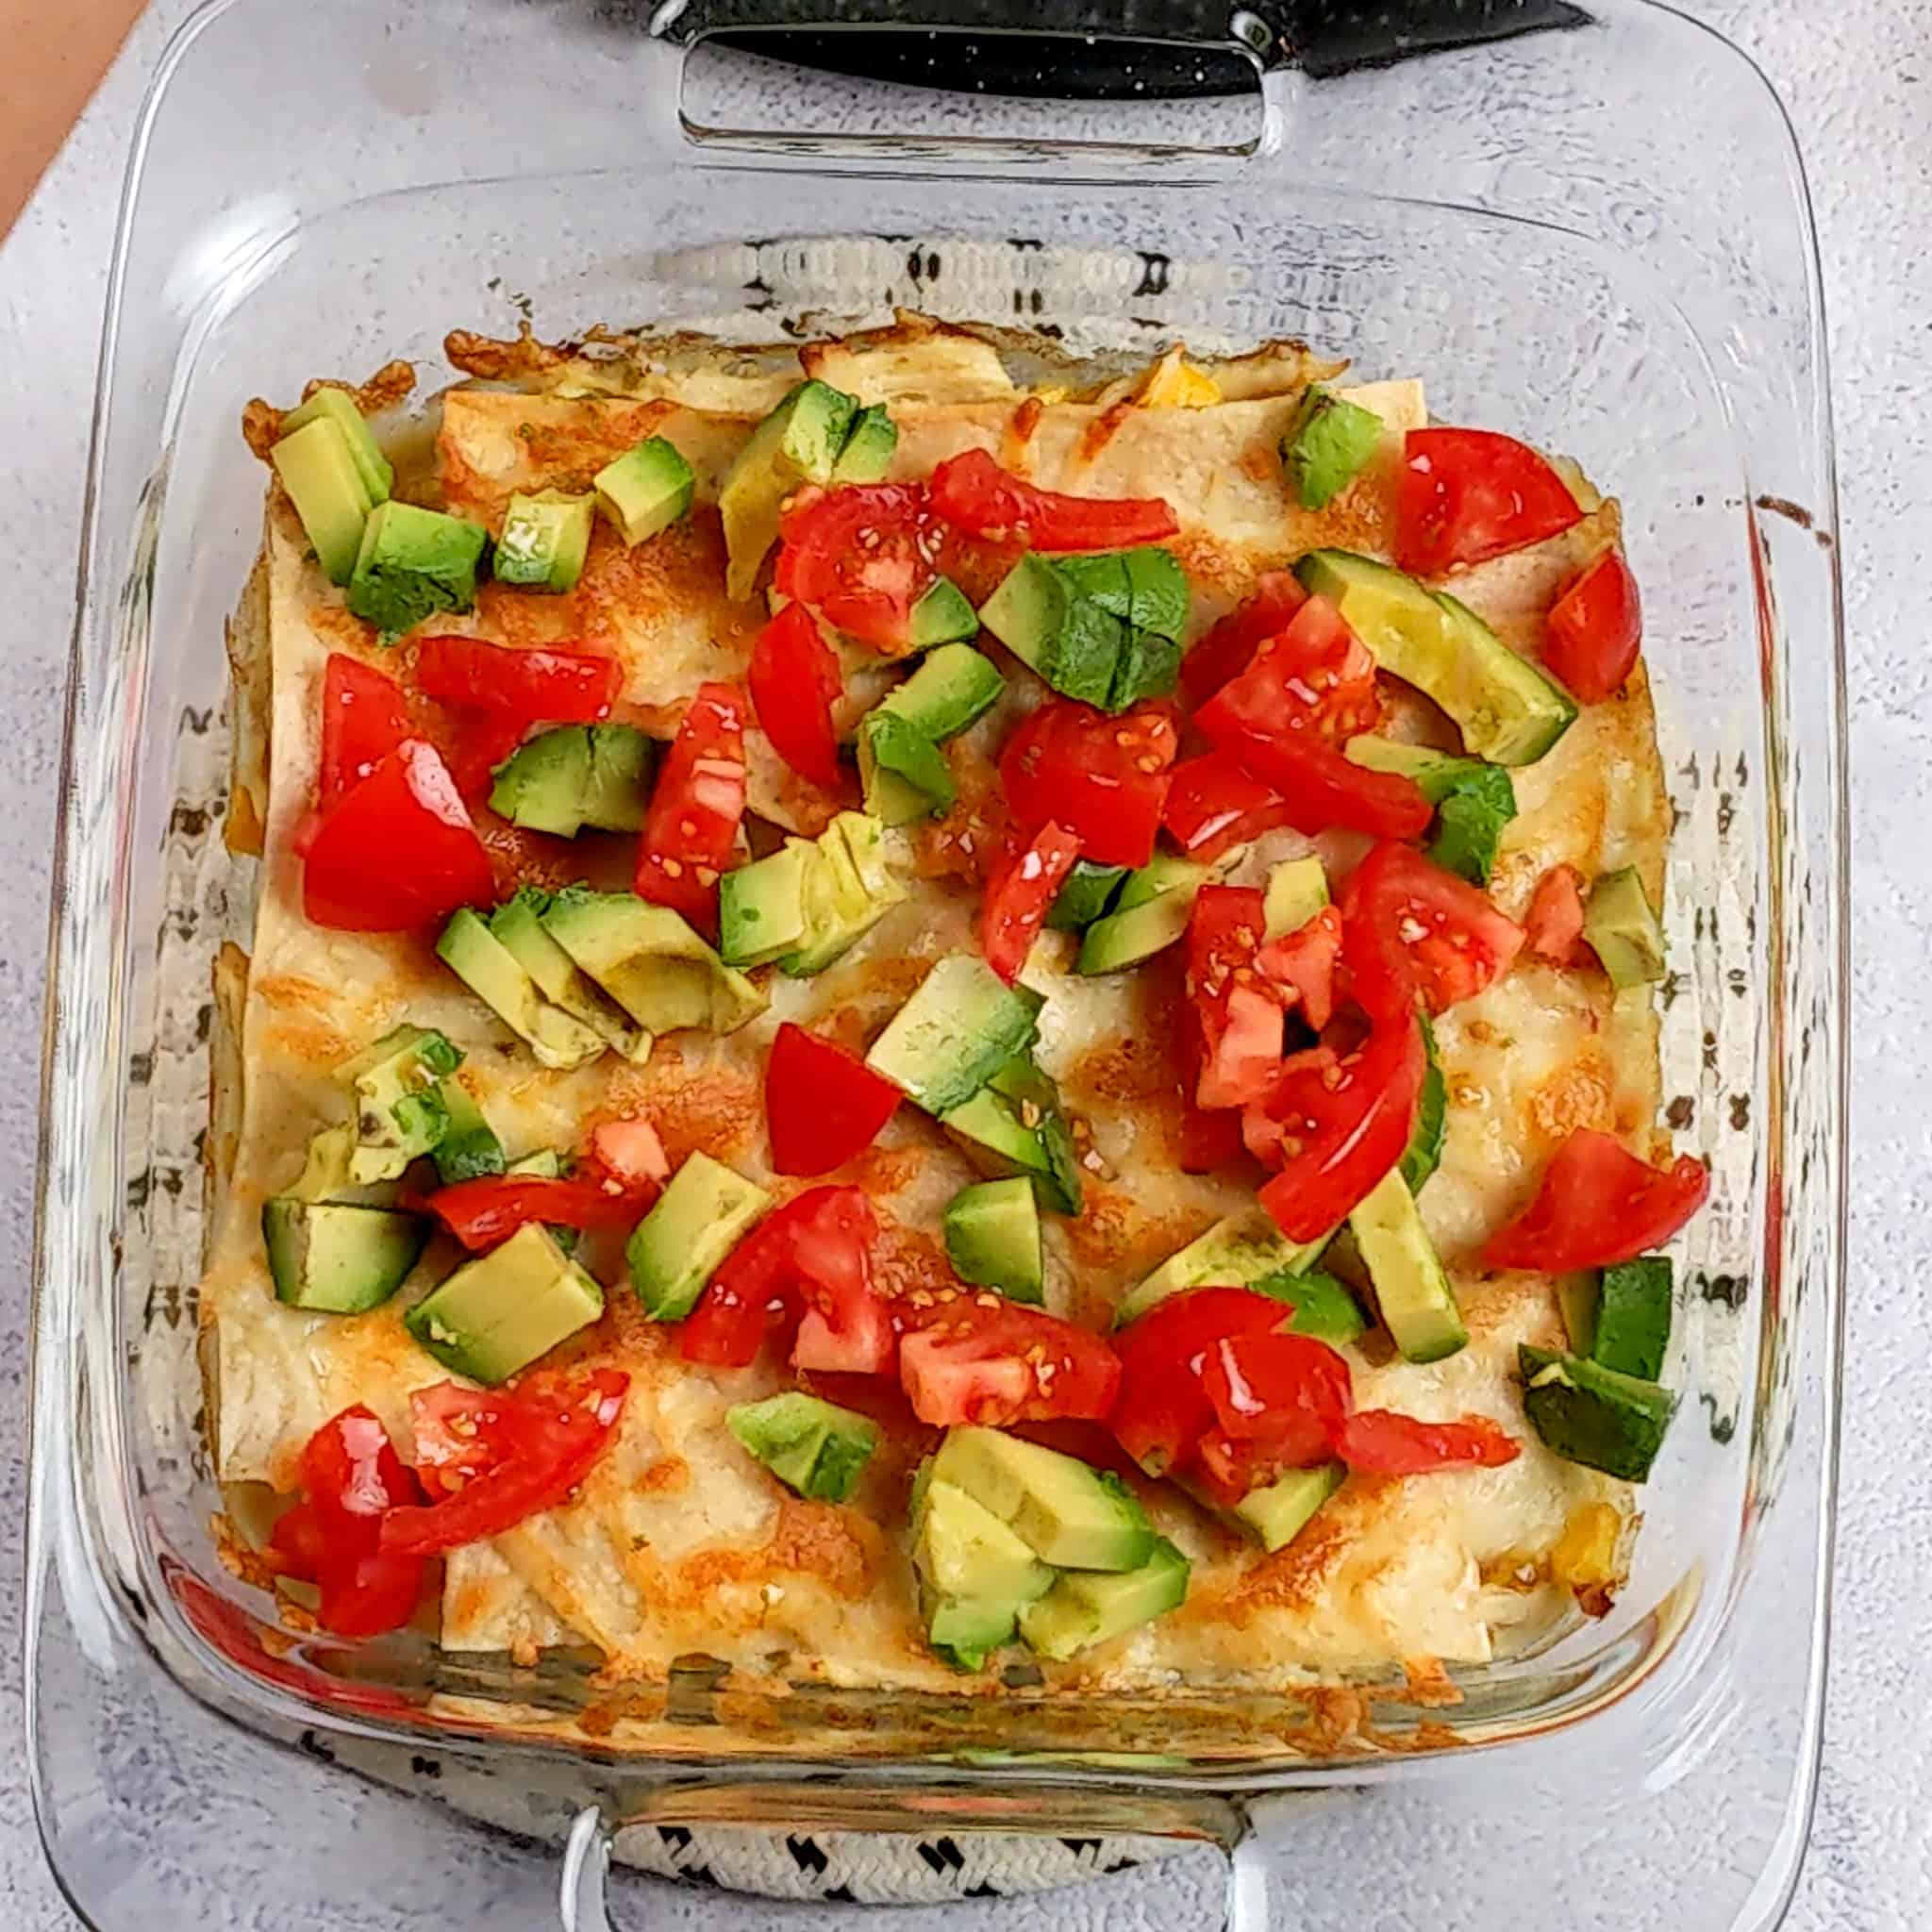 diced tomatoes, and diced avocado pieces on top of the baked chicken tortilla casserole